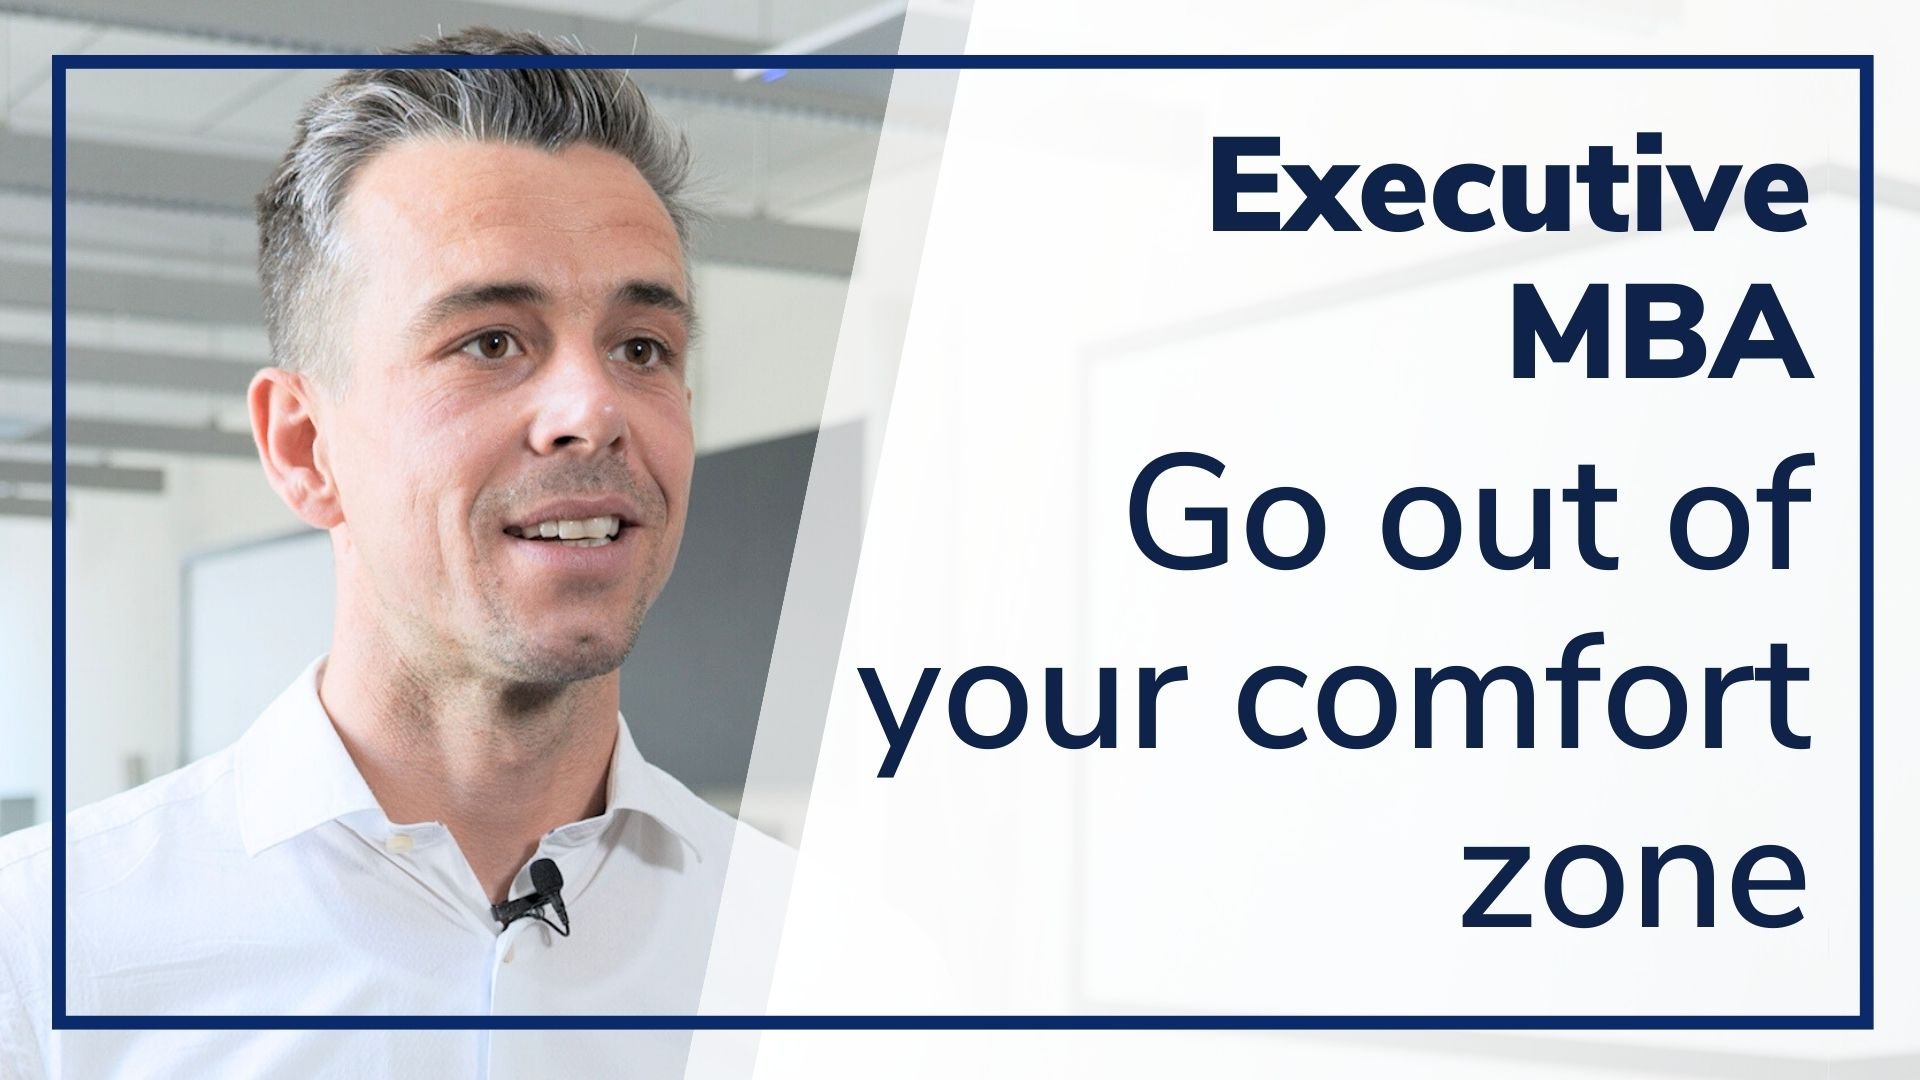 EMBA Alumnus Christoph - Go out of your comfort zone